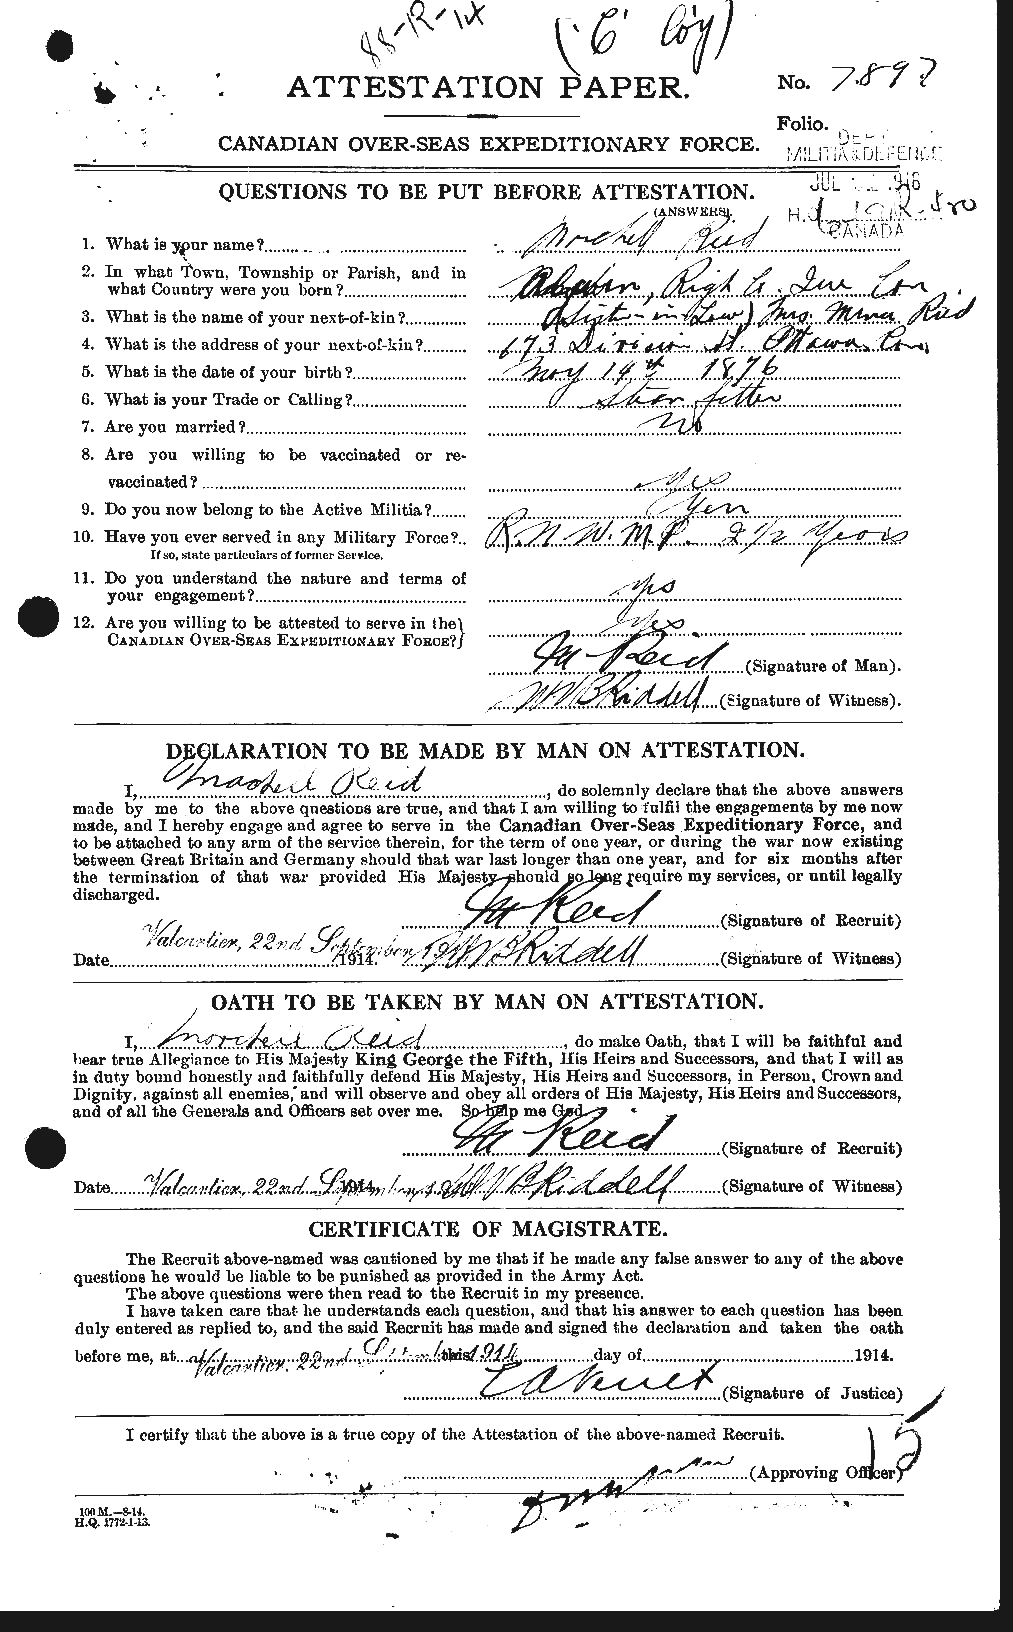 Personnel Records of the First World War - CEF 598940a